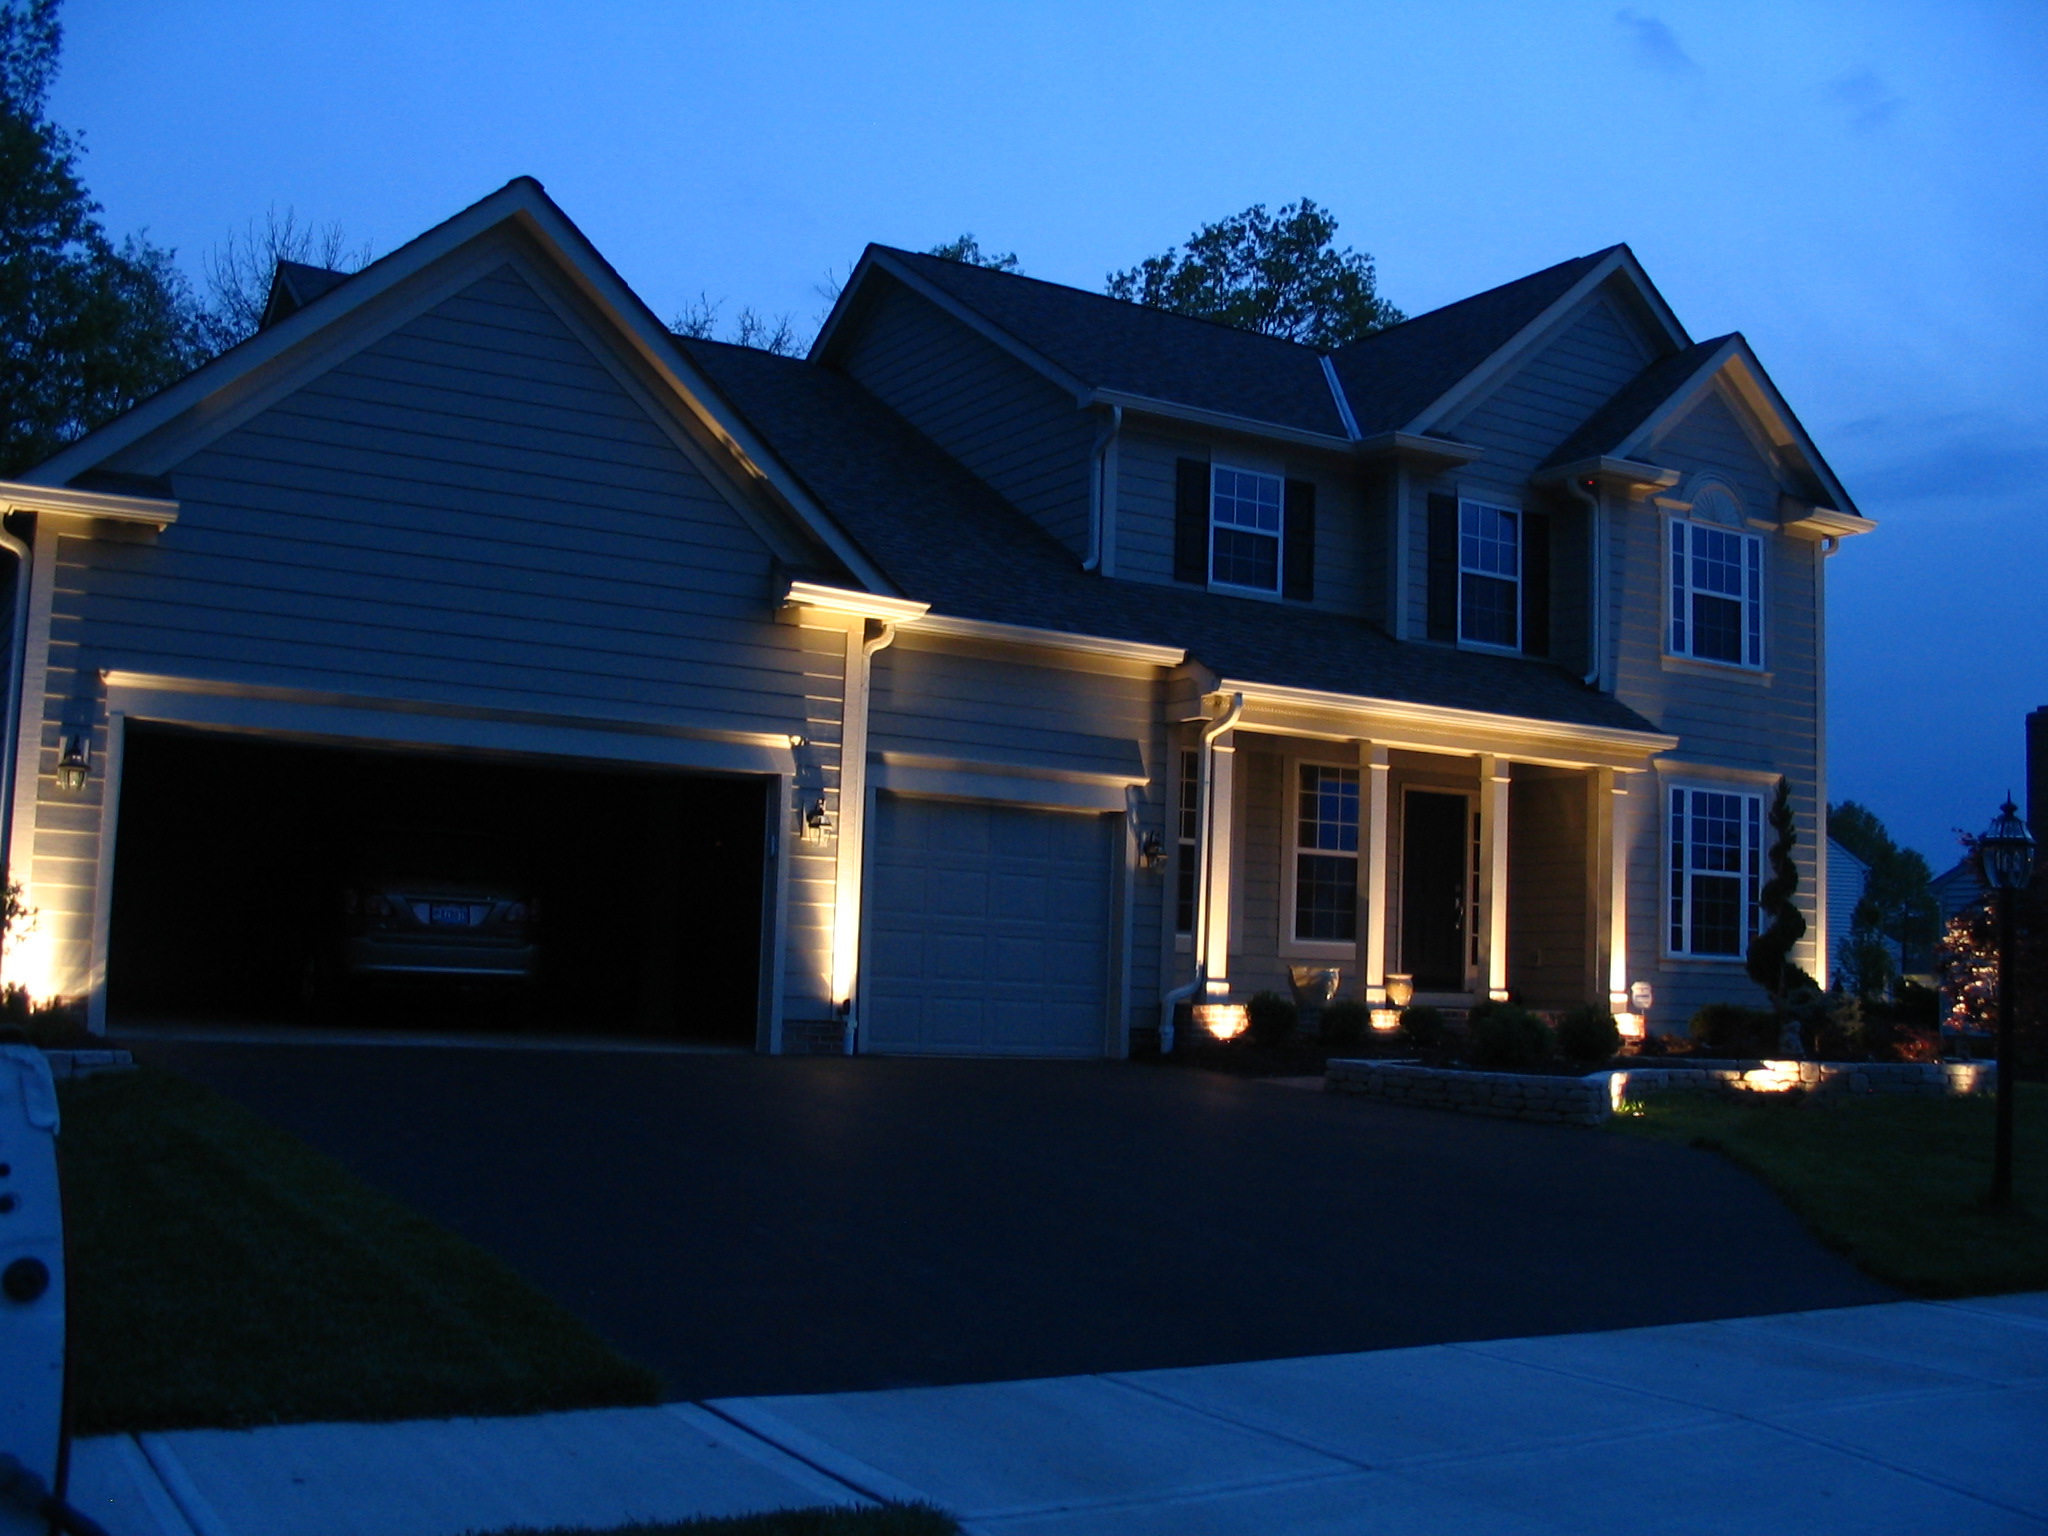 Outdoor Lighting installed by Techmer Nursery located in Orange County NY